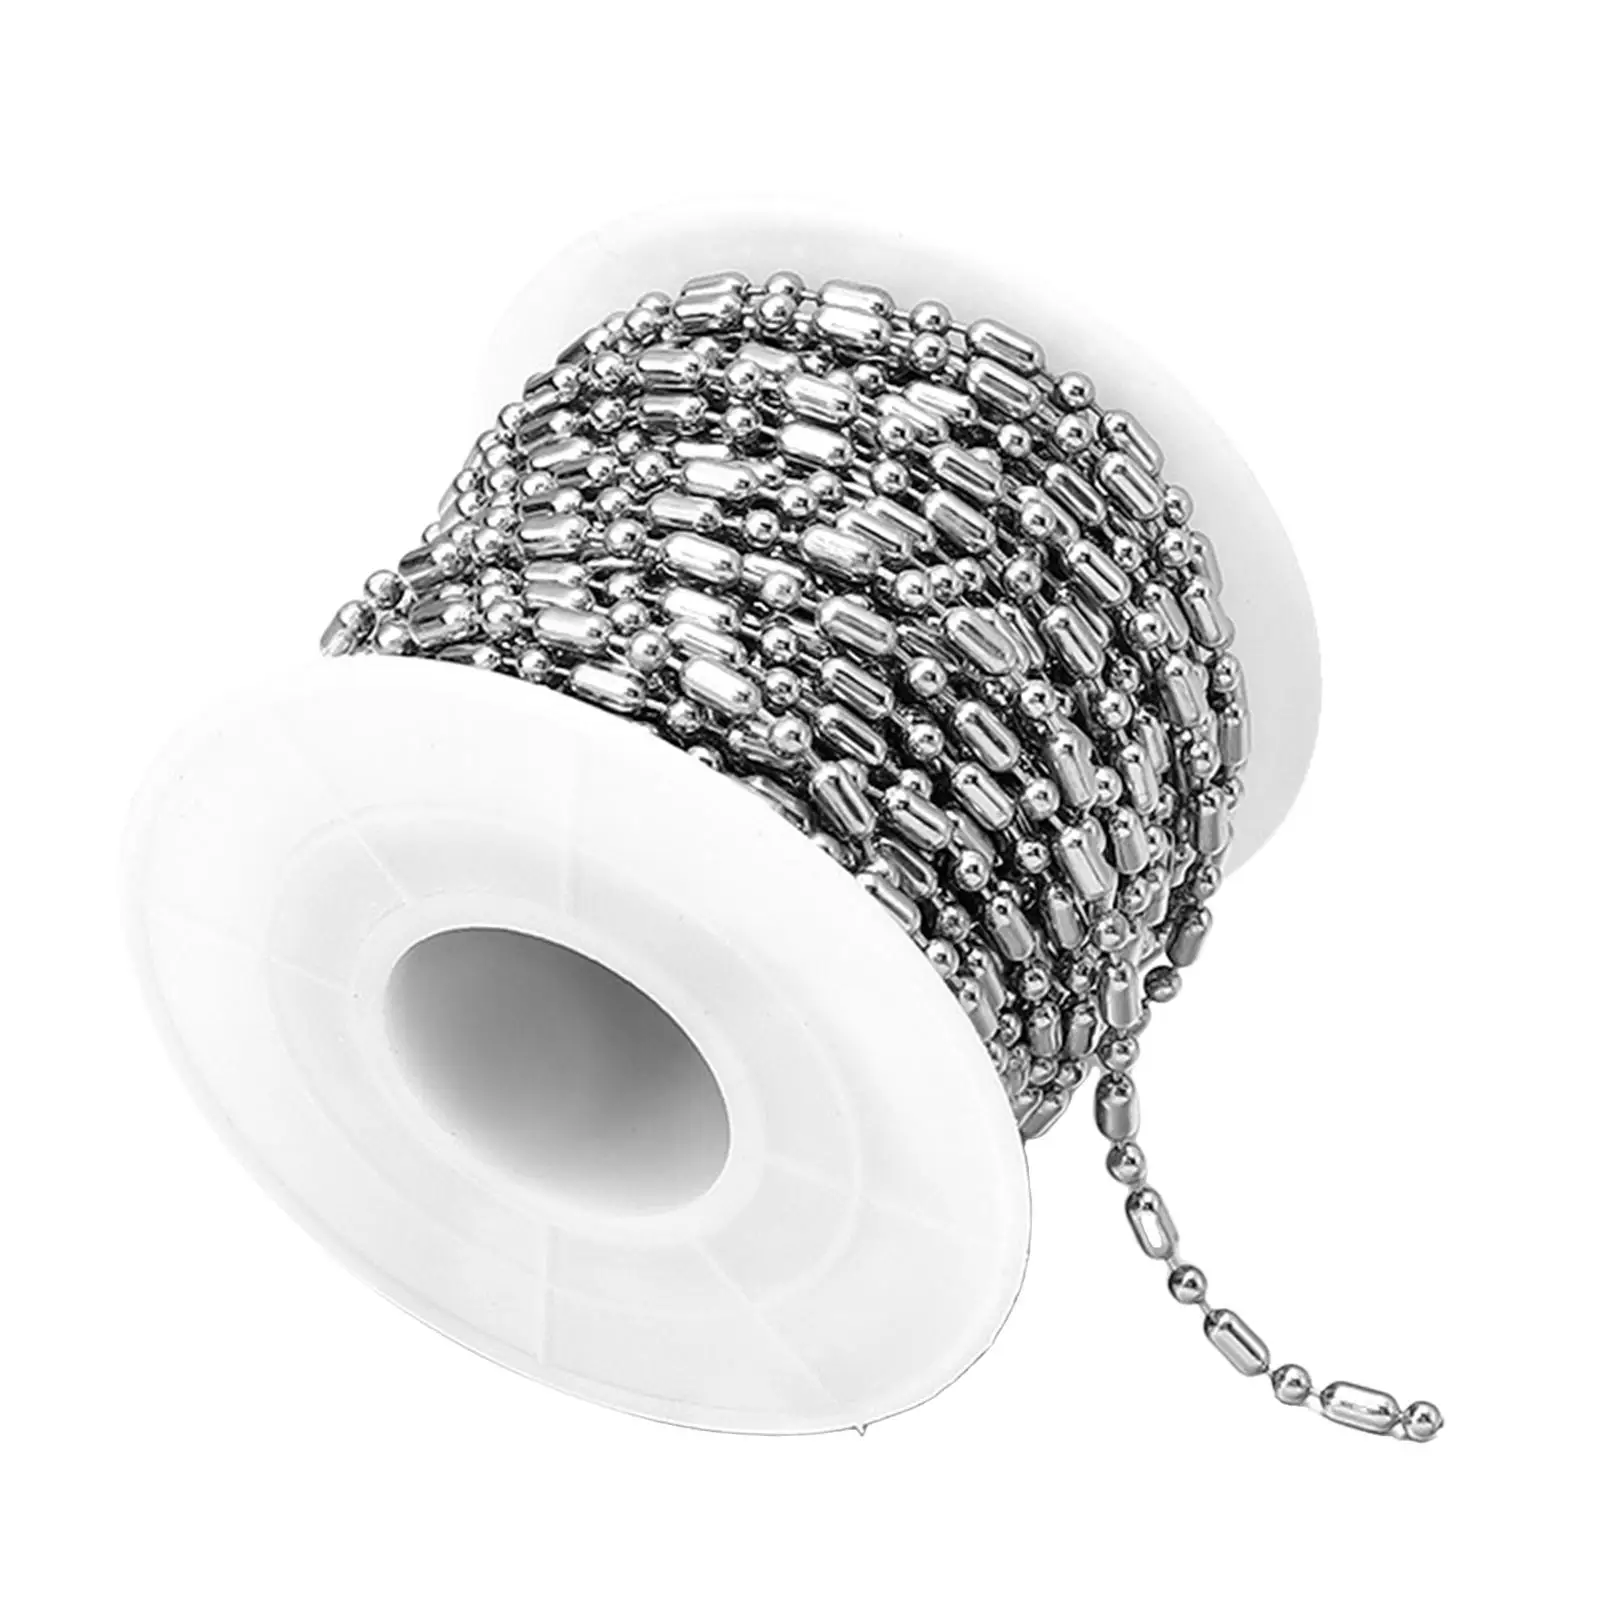 Stainless Steel Ball Bead Chain Unwelded Twisted 2.4mm Curb Chains for Jewelry Making DIY Anklet Pendant Necklaces Accessories